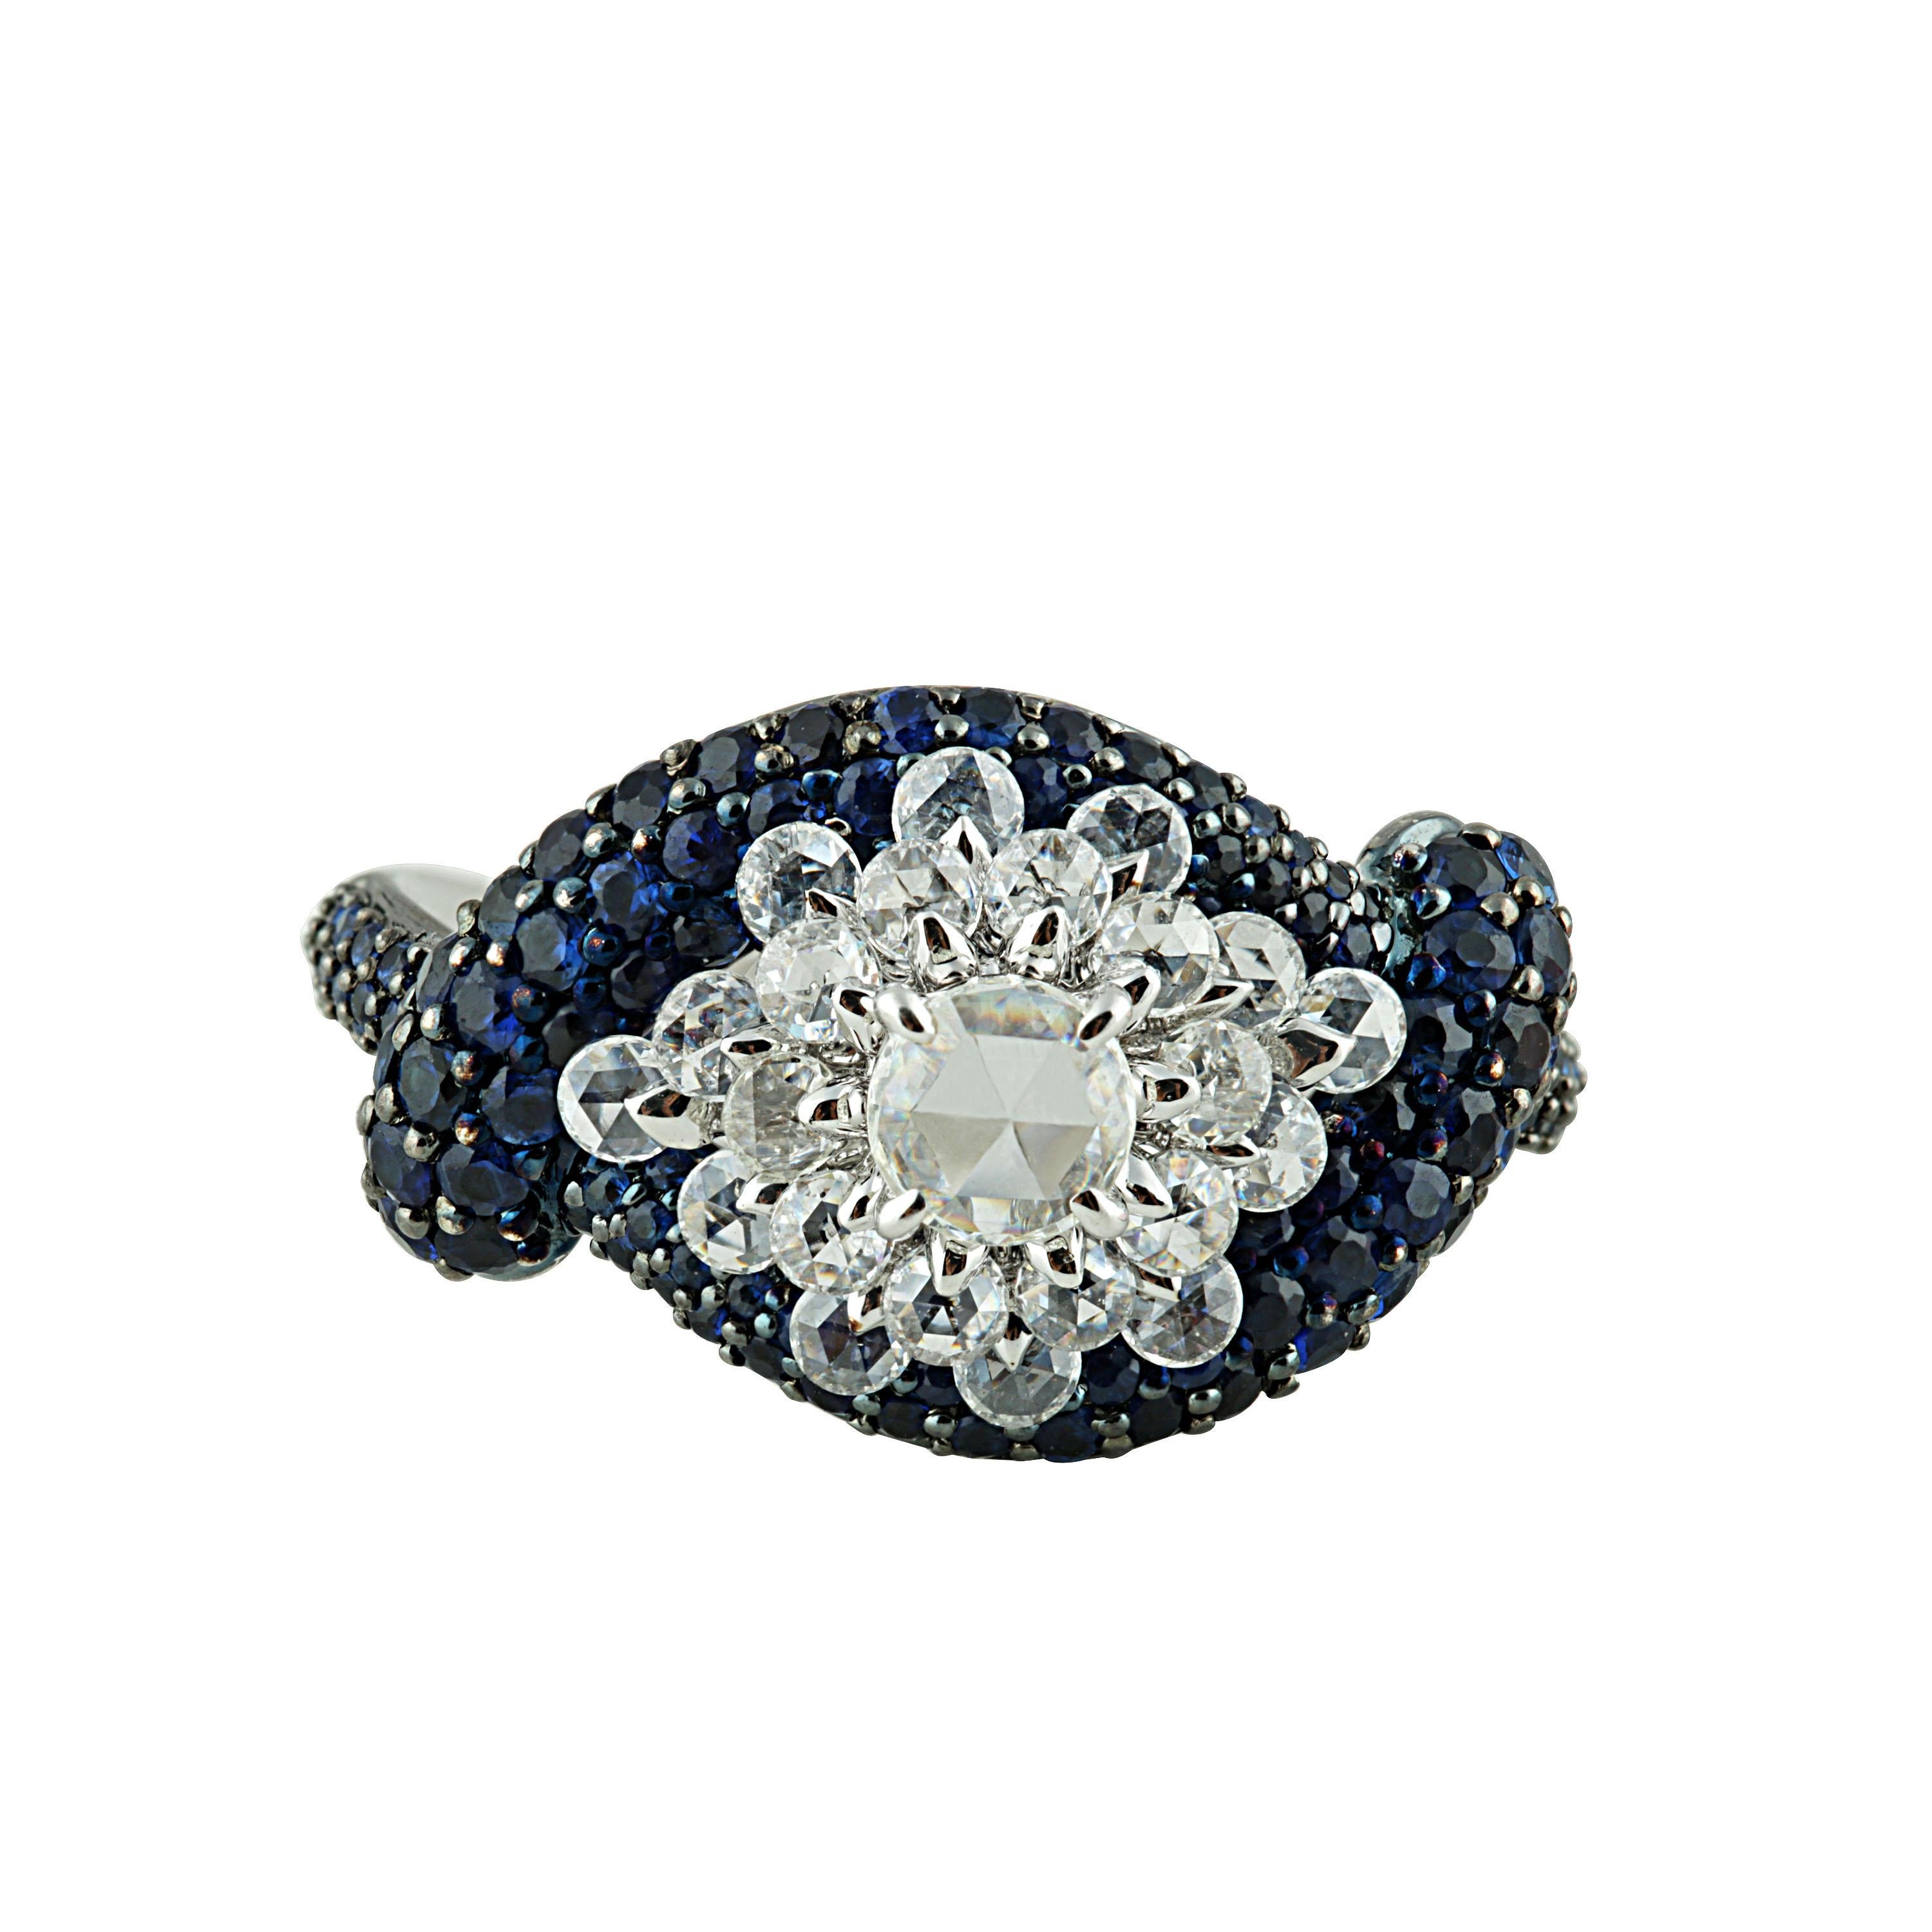 Blue sapphire and rose cut diamond ring

A cluster of round rosecut diamonds is enhanced by and encased within a regal row of blue sapphires, giving this 18K white gold ring a look and feel like no other. Set in prong, pave and drill settings using